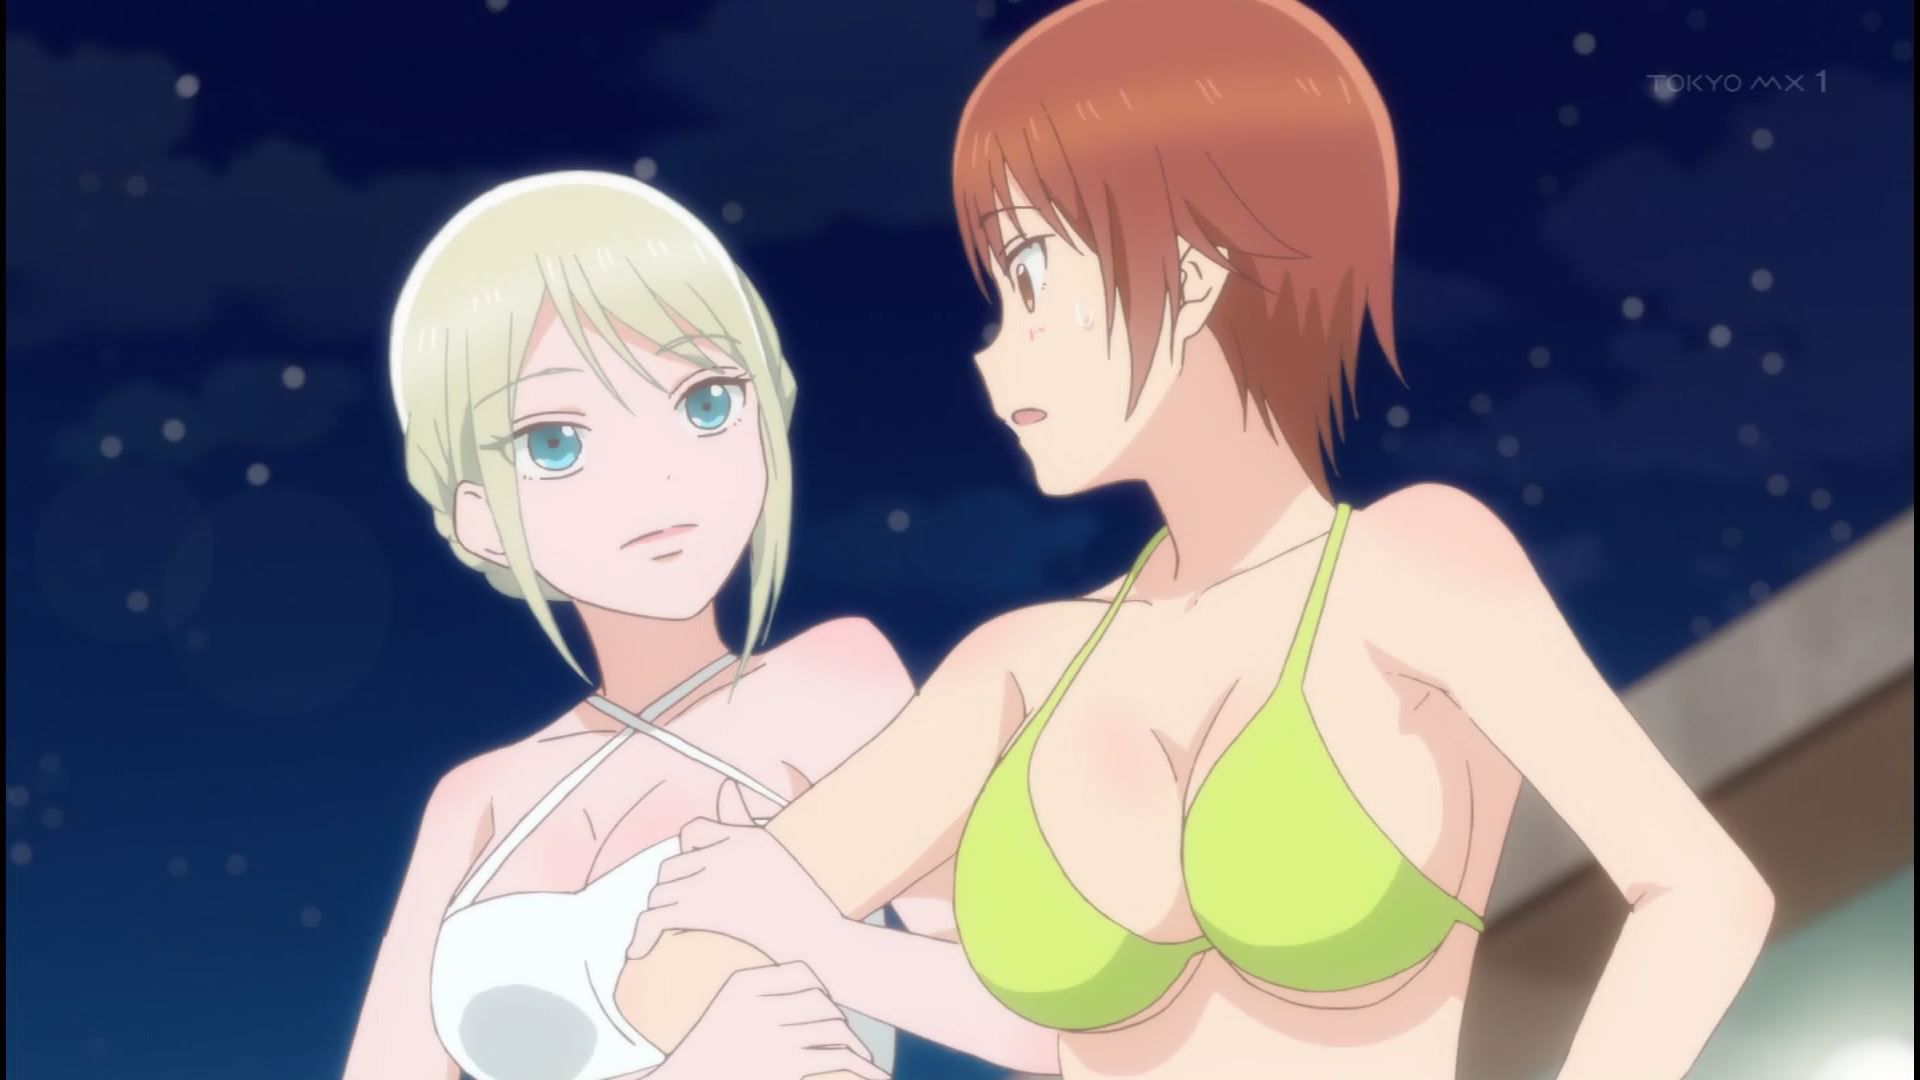 Anime [waste of high school girl] 8 episodes, such as erotic swimsuit and erotic dressing of girls 20